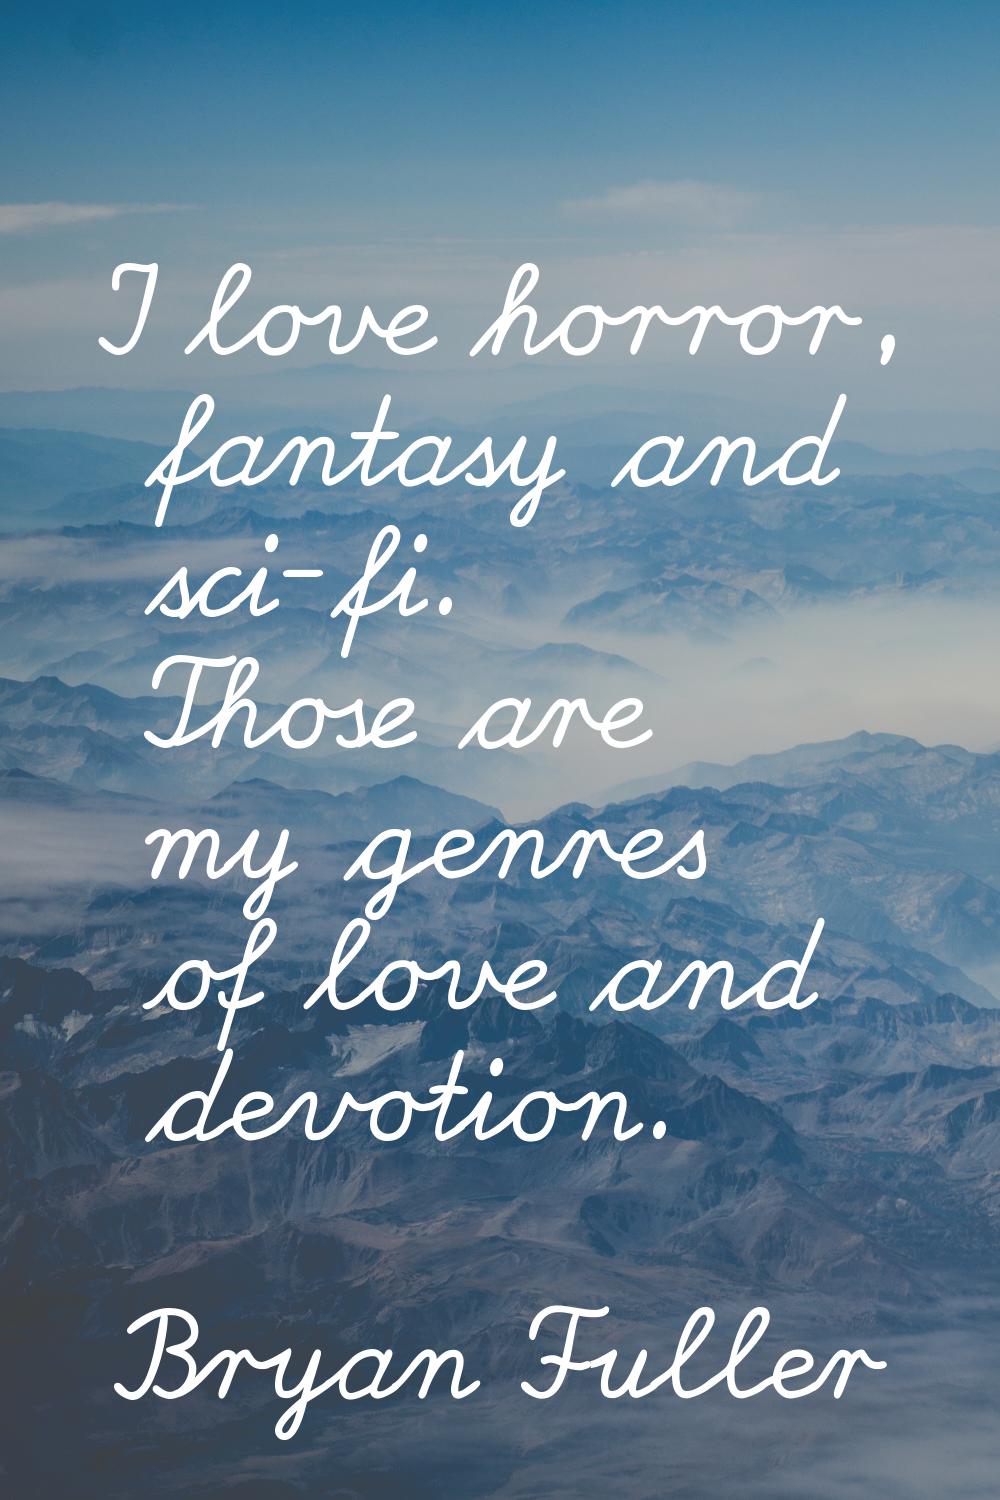 I love horror, fantasy and sci-fi. Those are my genres of love and devotion.